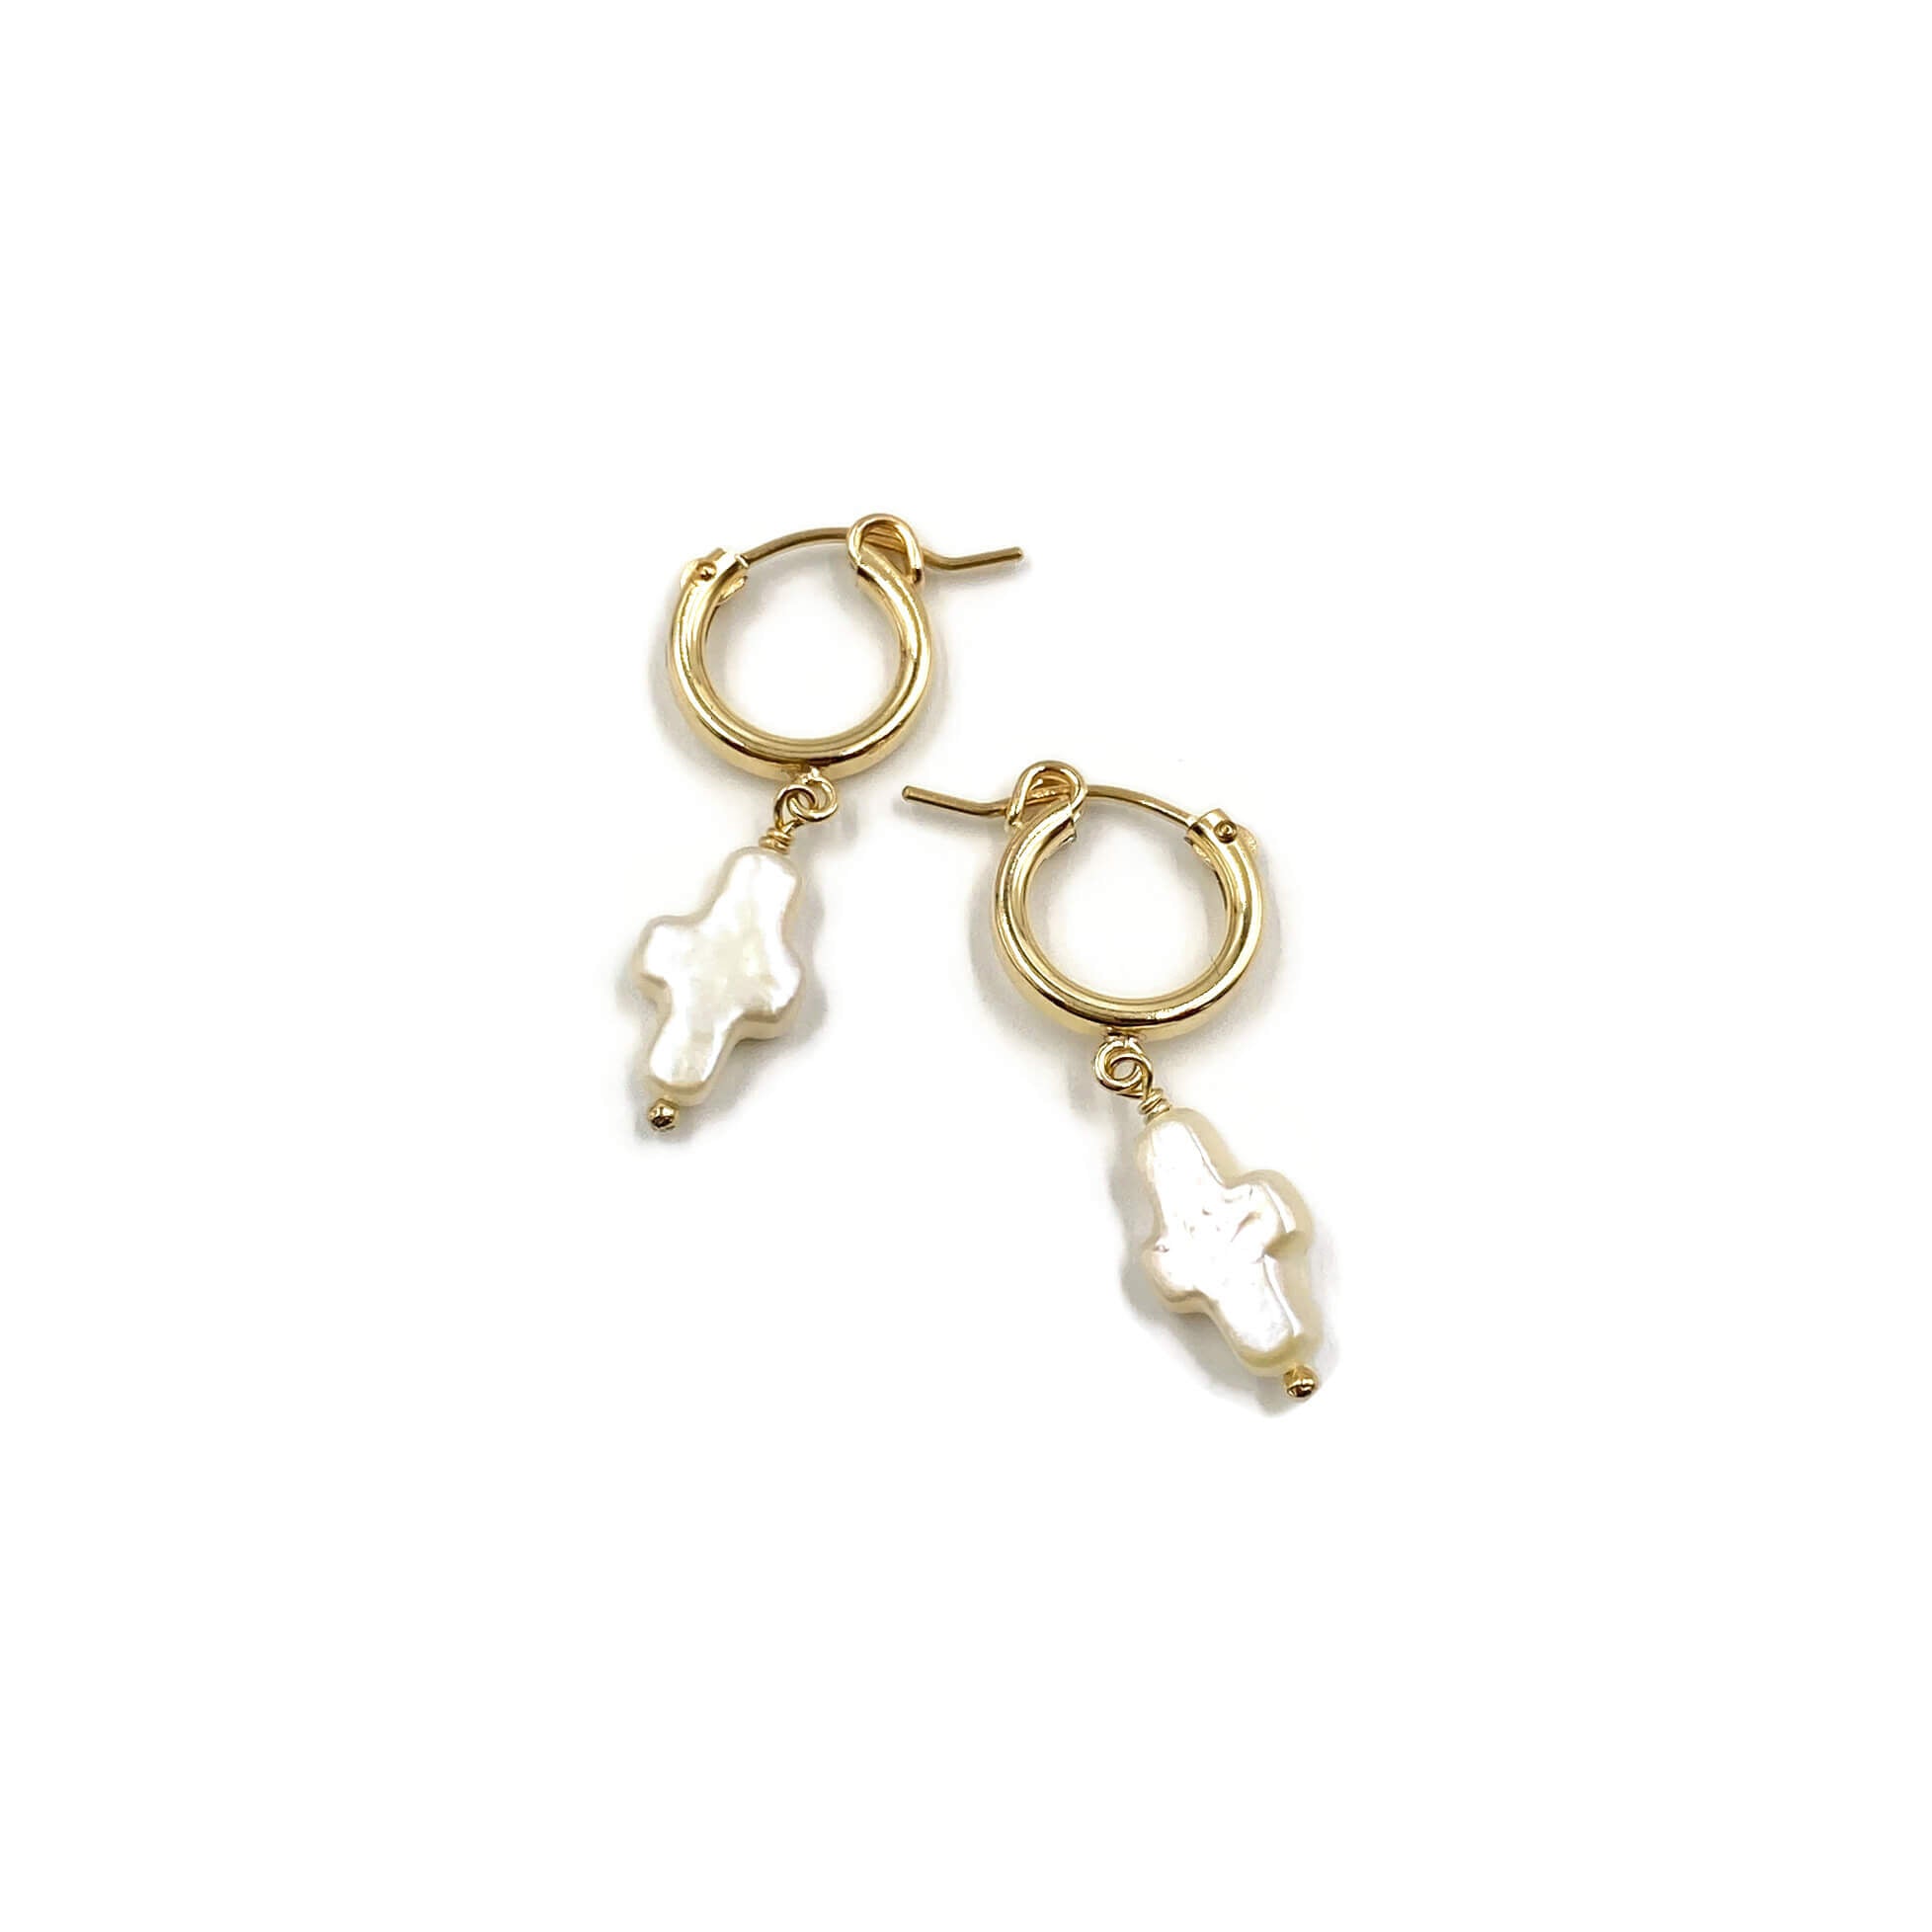 These are pearl cross hoop huggie earrings that can be made of gold filled or sterling silver.